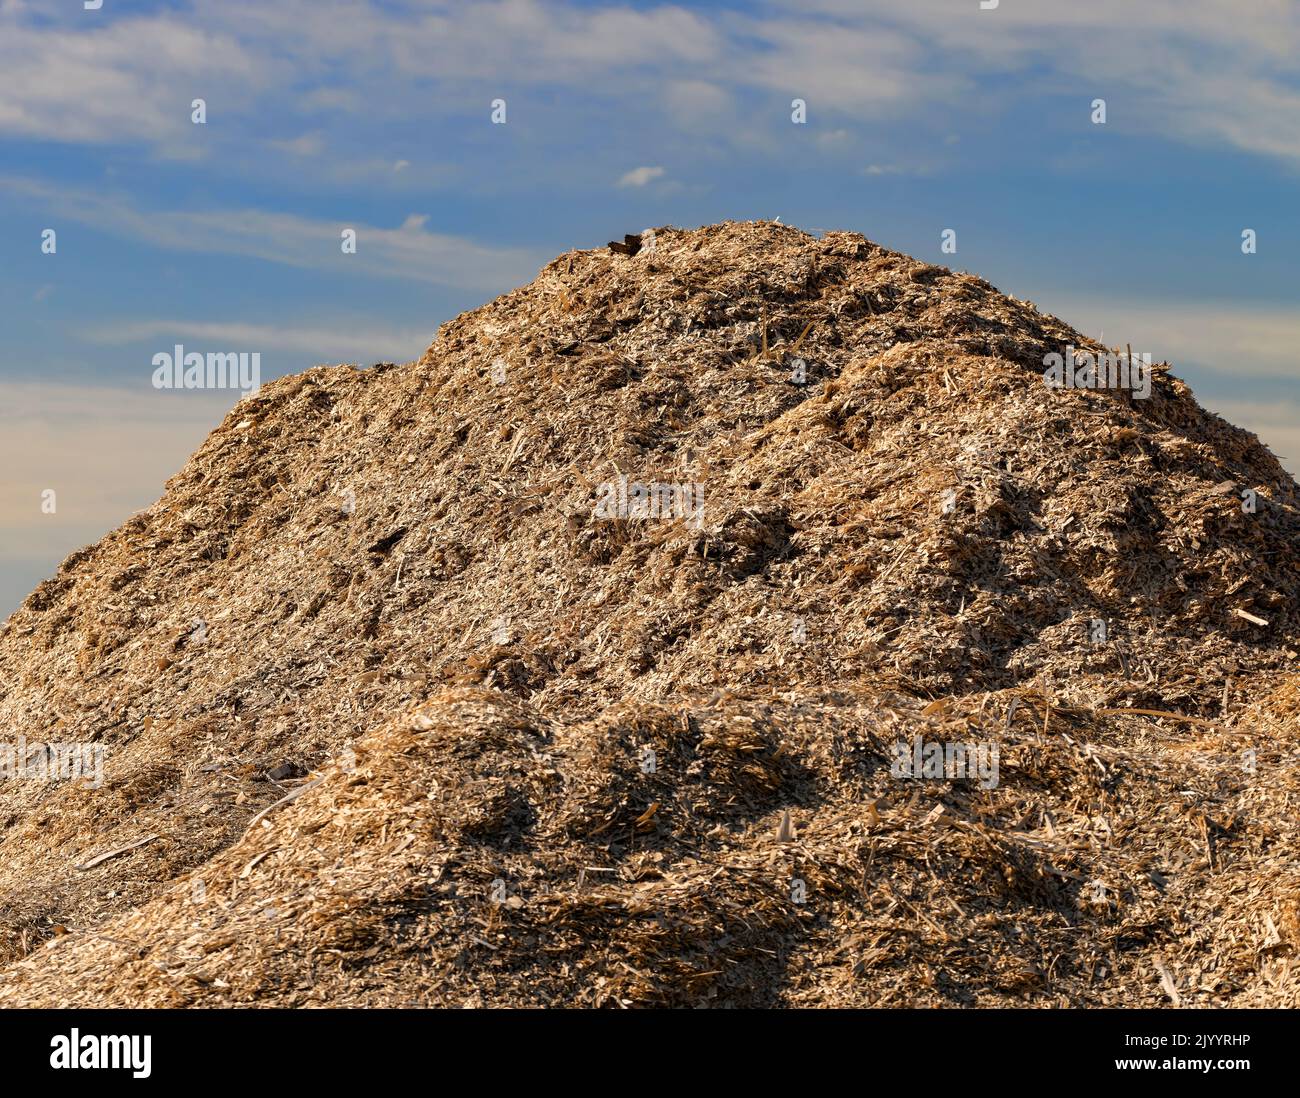 A large pile of sawdust from wood after wood processing, waste from wood production in the form of sawdust Stock Photo